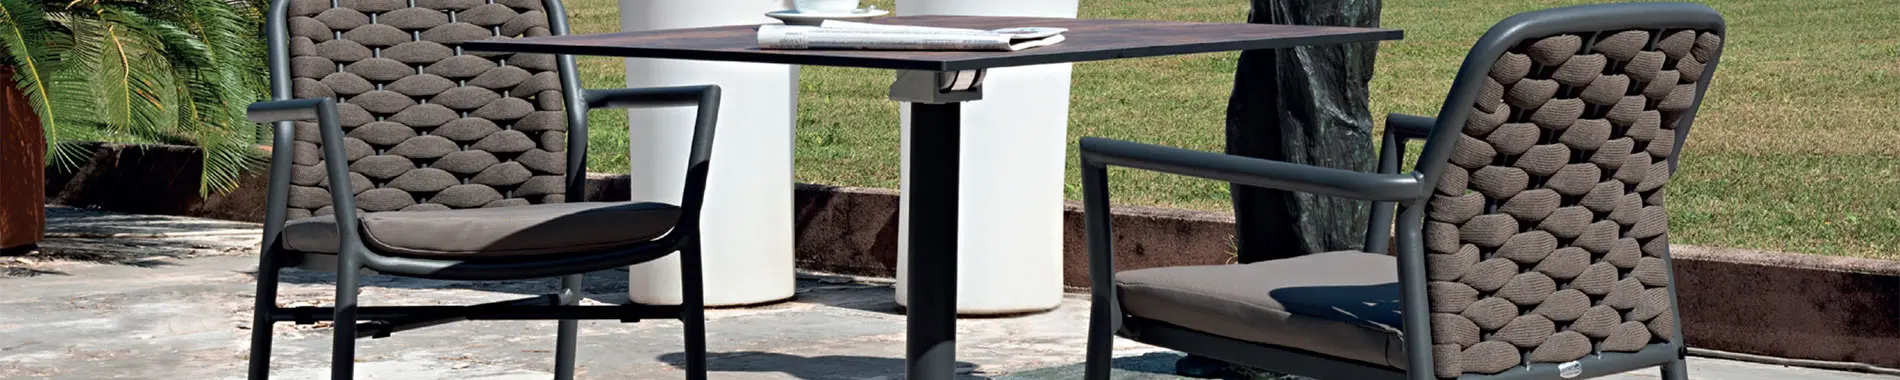 Outdoor furniture from the collection: Domino